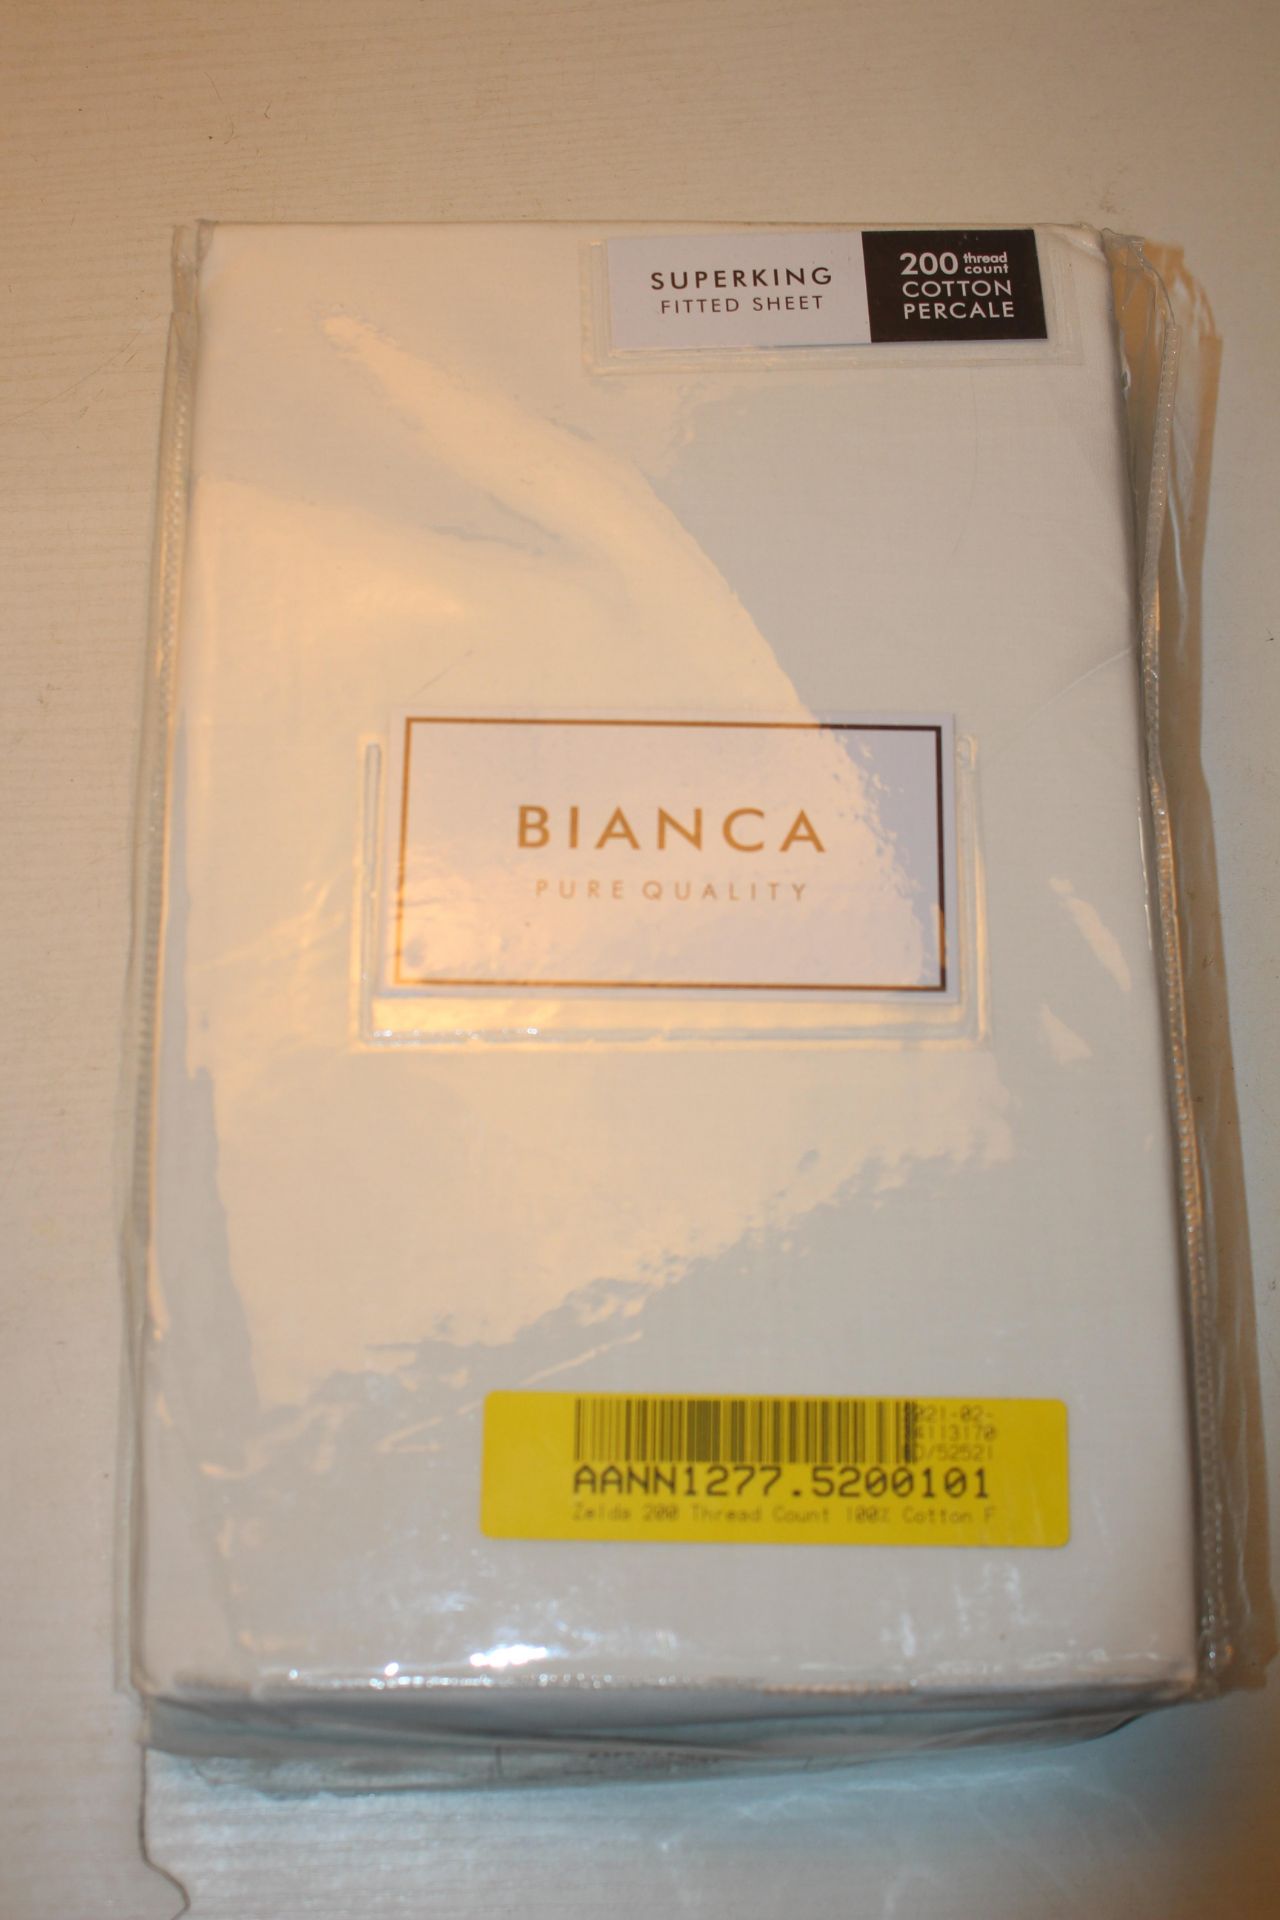 BAGGED BIANCA 200 THREAD COUNT COTTON PERCALE SUPERKING FITTED SHEET RRP £18.99 (AS SEEN IN